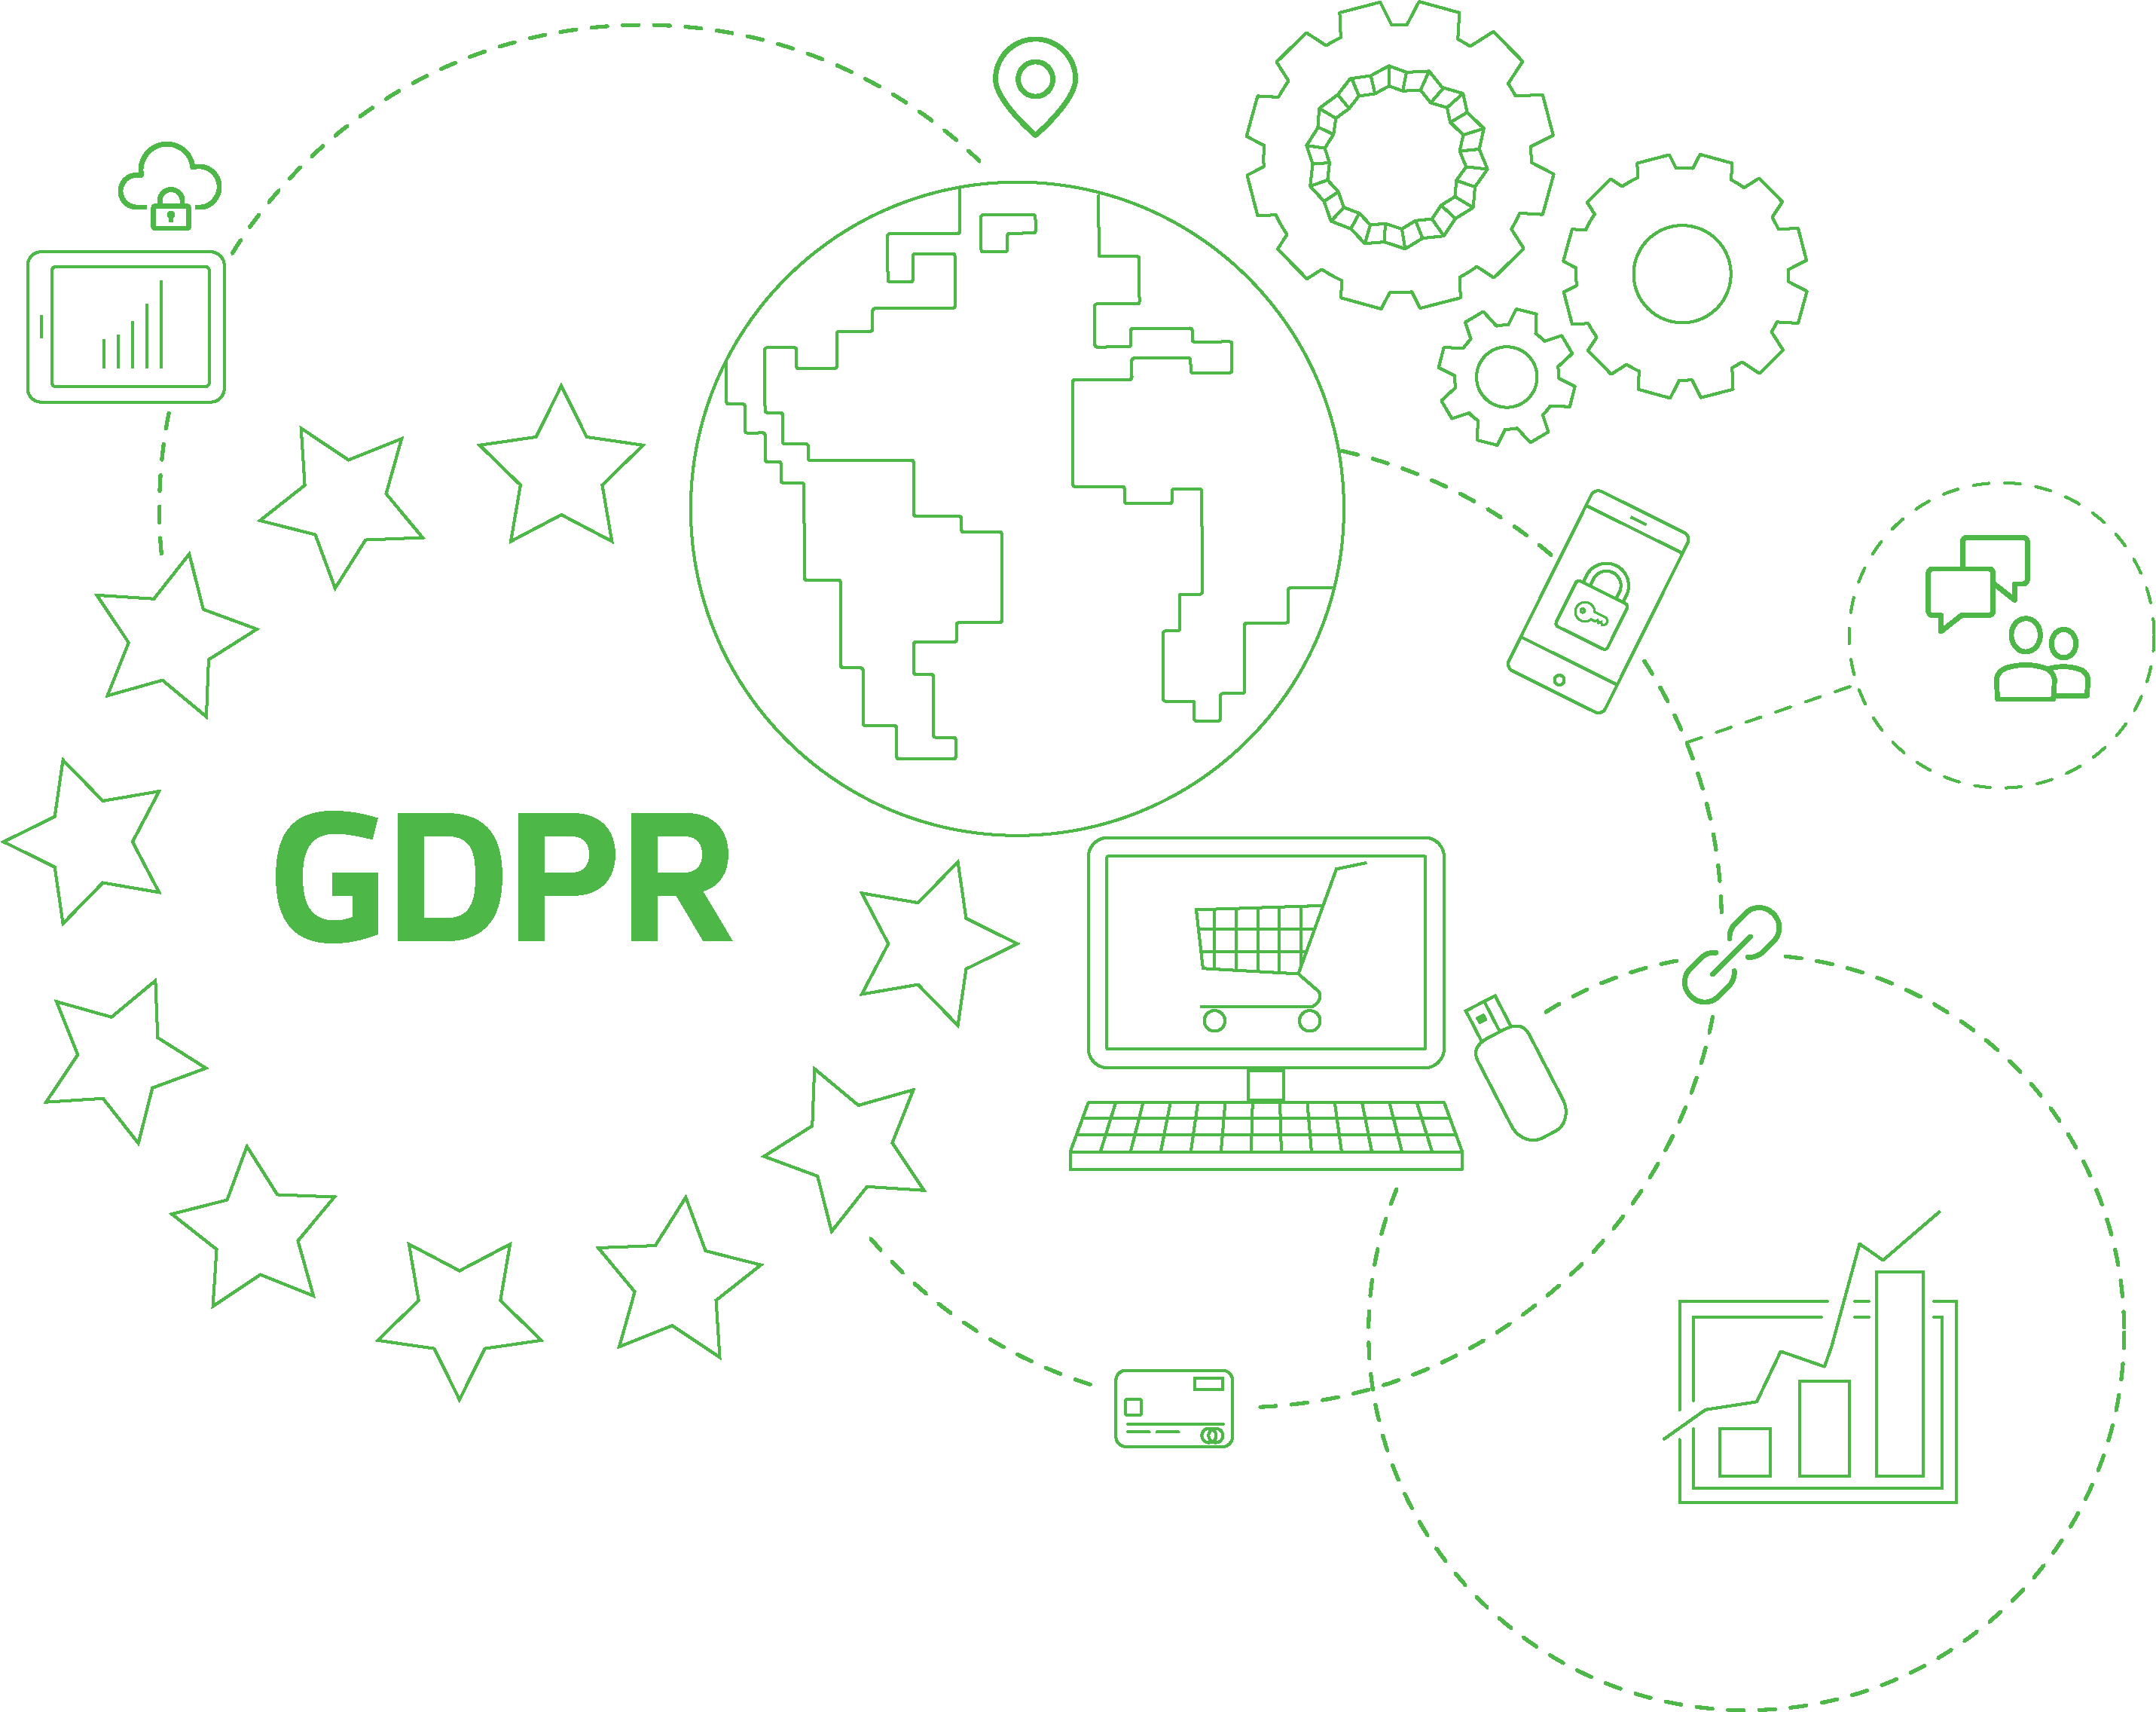 gdpr_data_protection_regulation_complex_green.png